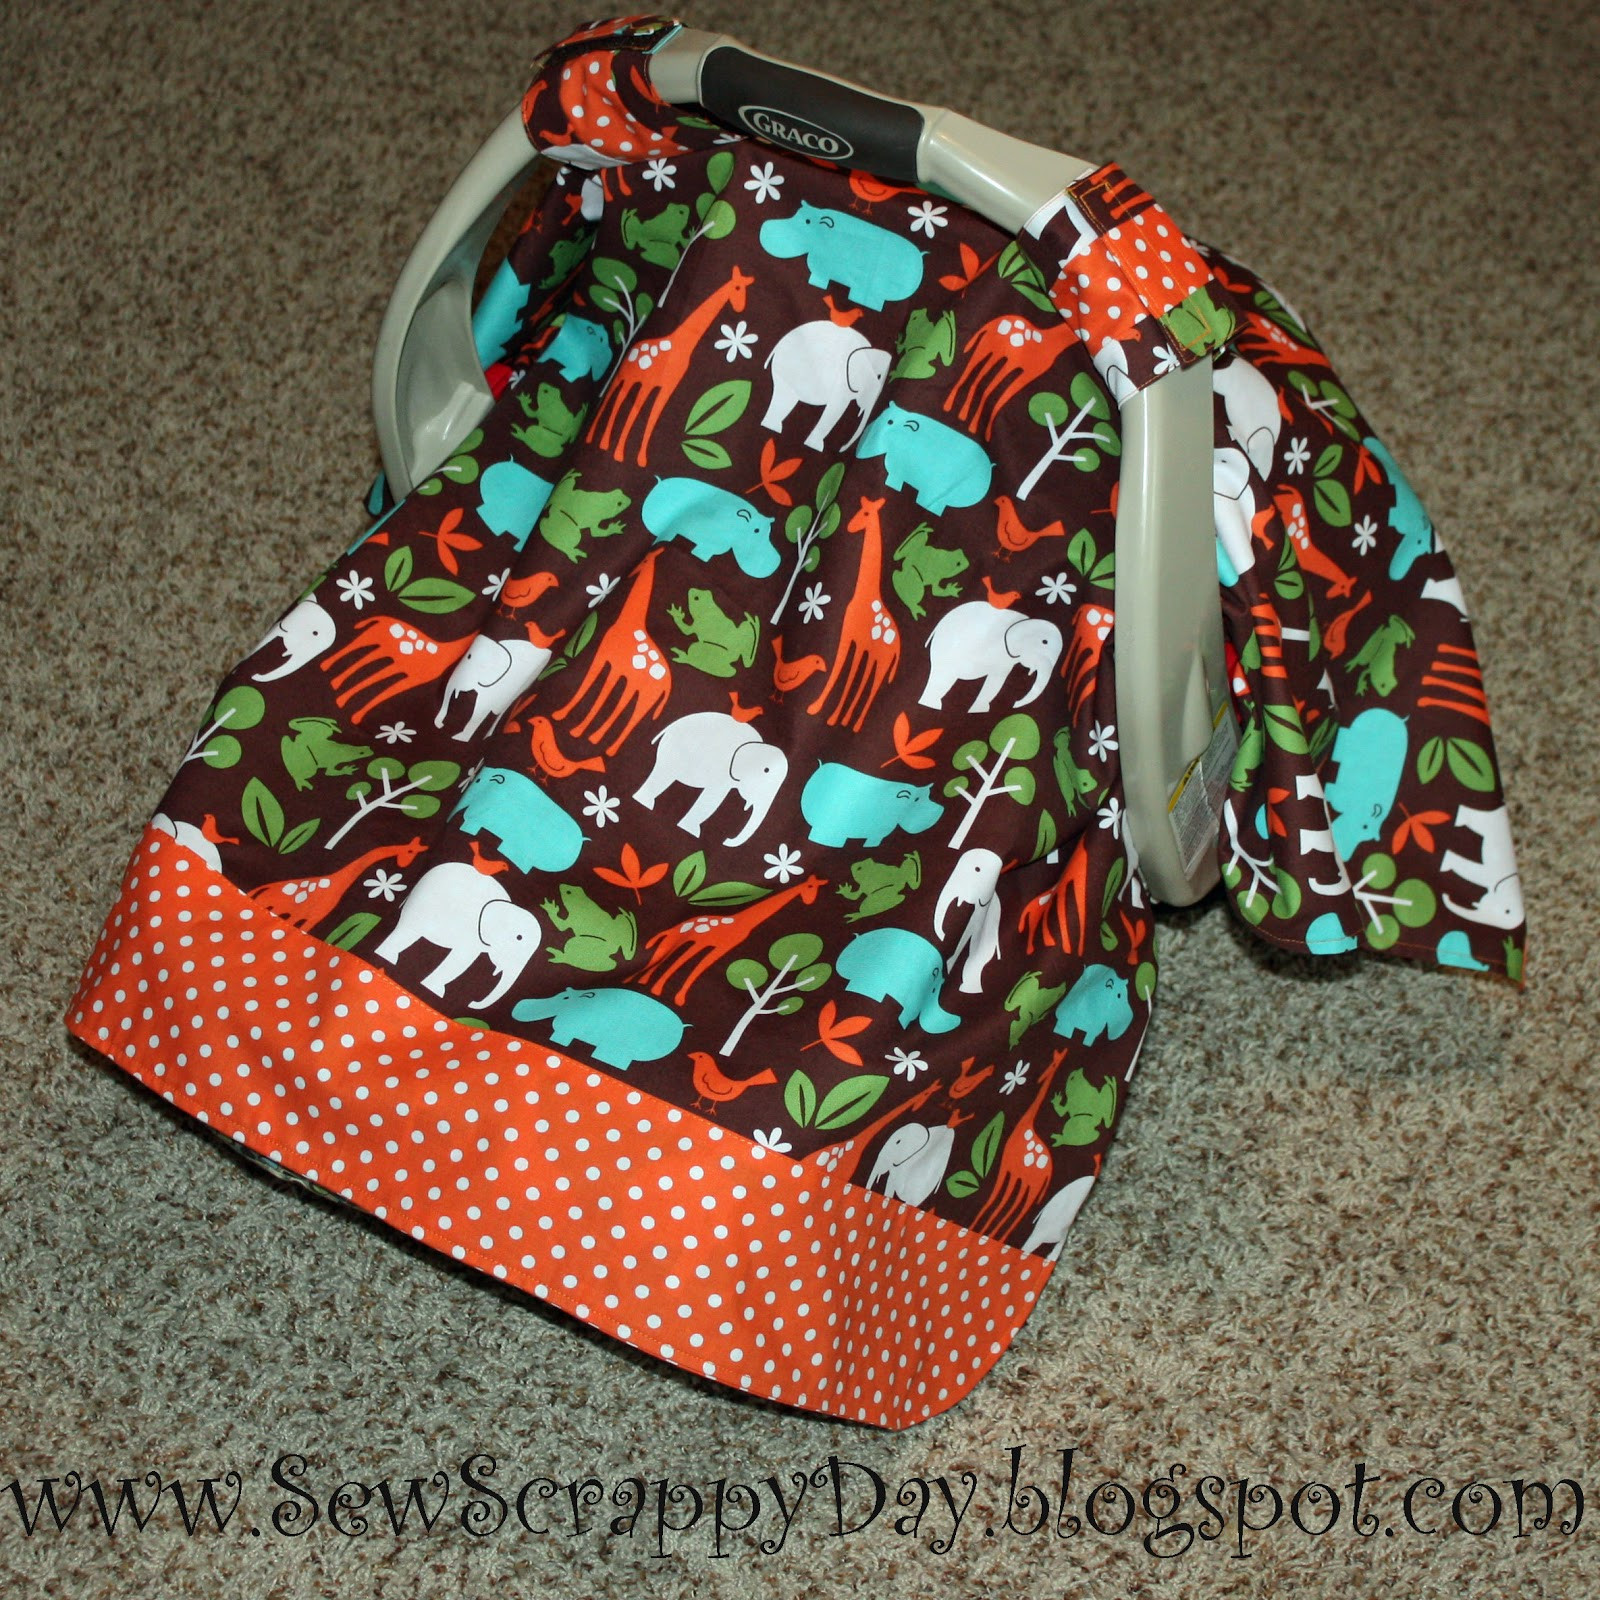 DIY Baby Carrier
 Sew Scrappy Day DIY Infant Carrier Cover Perfect for